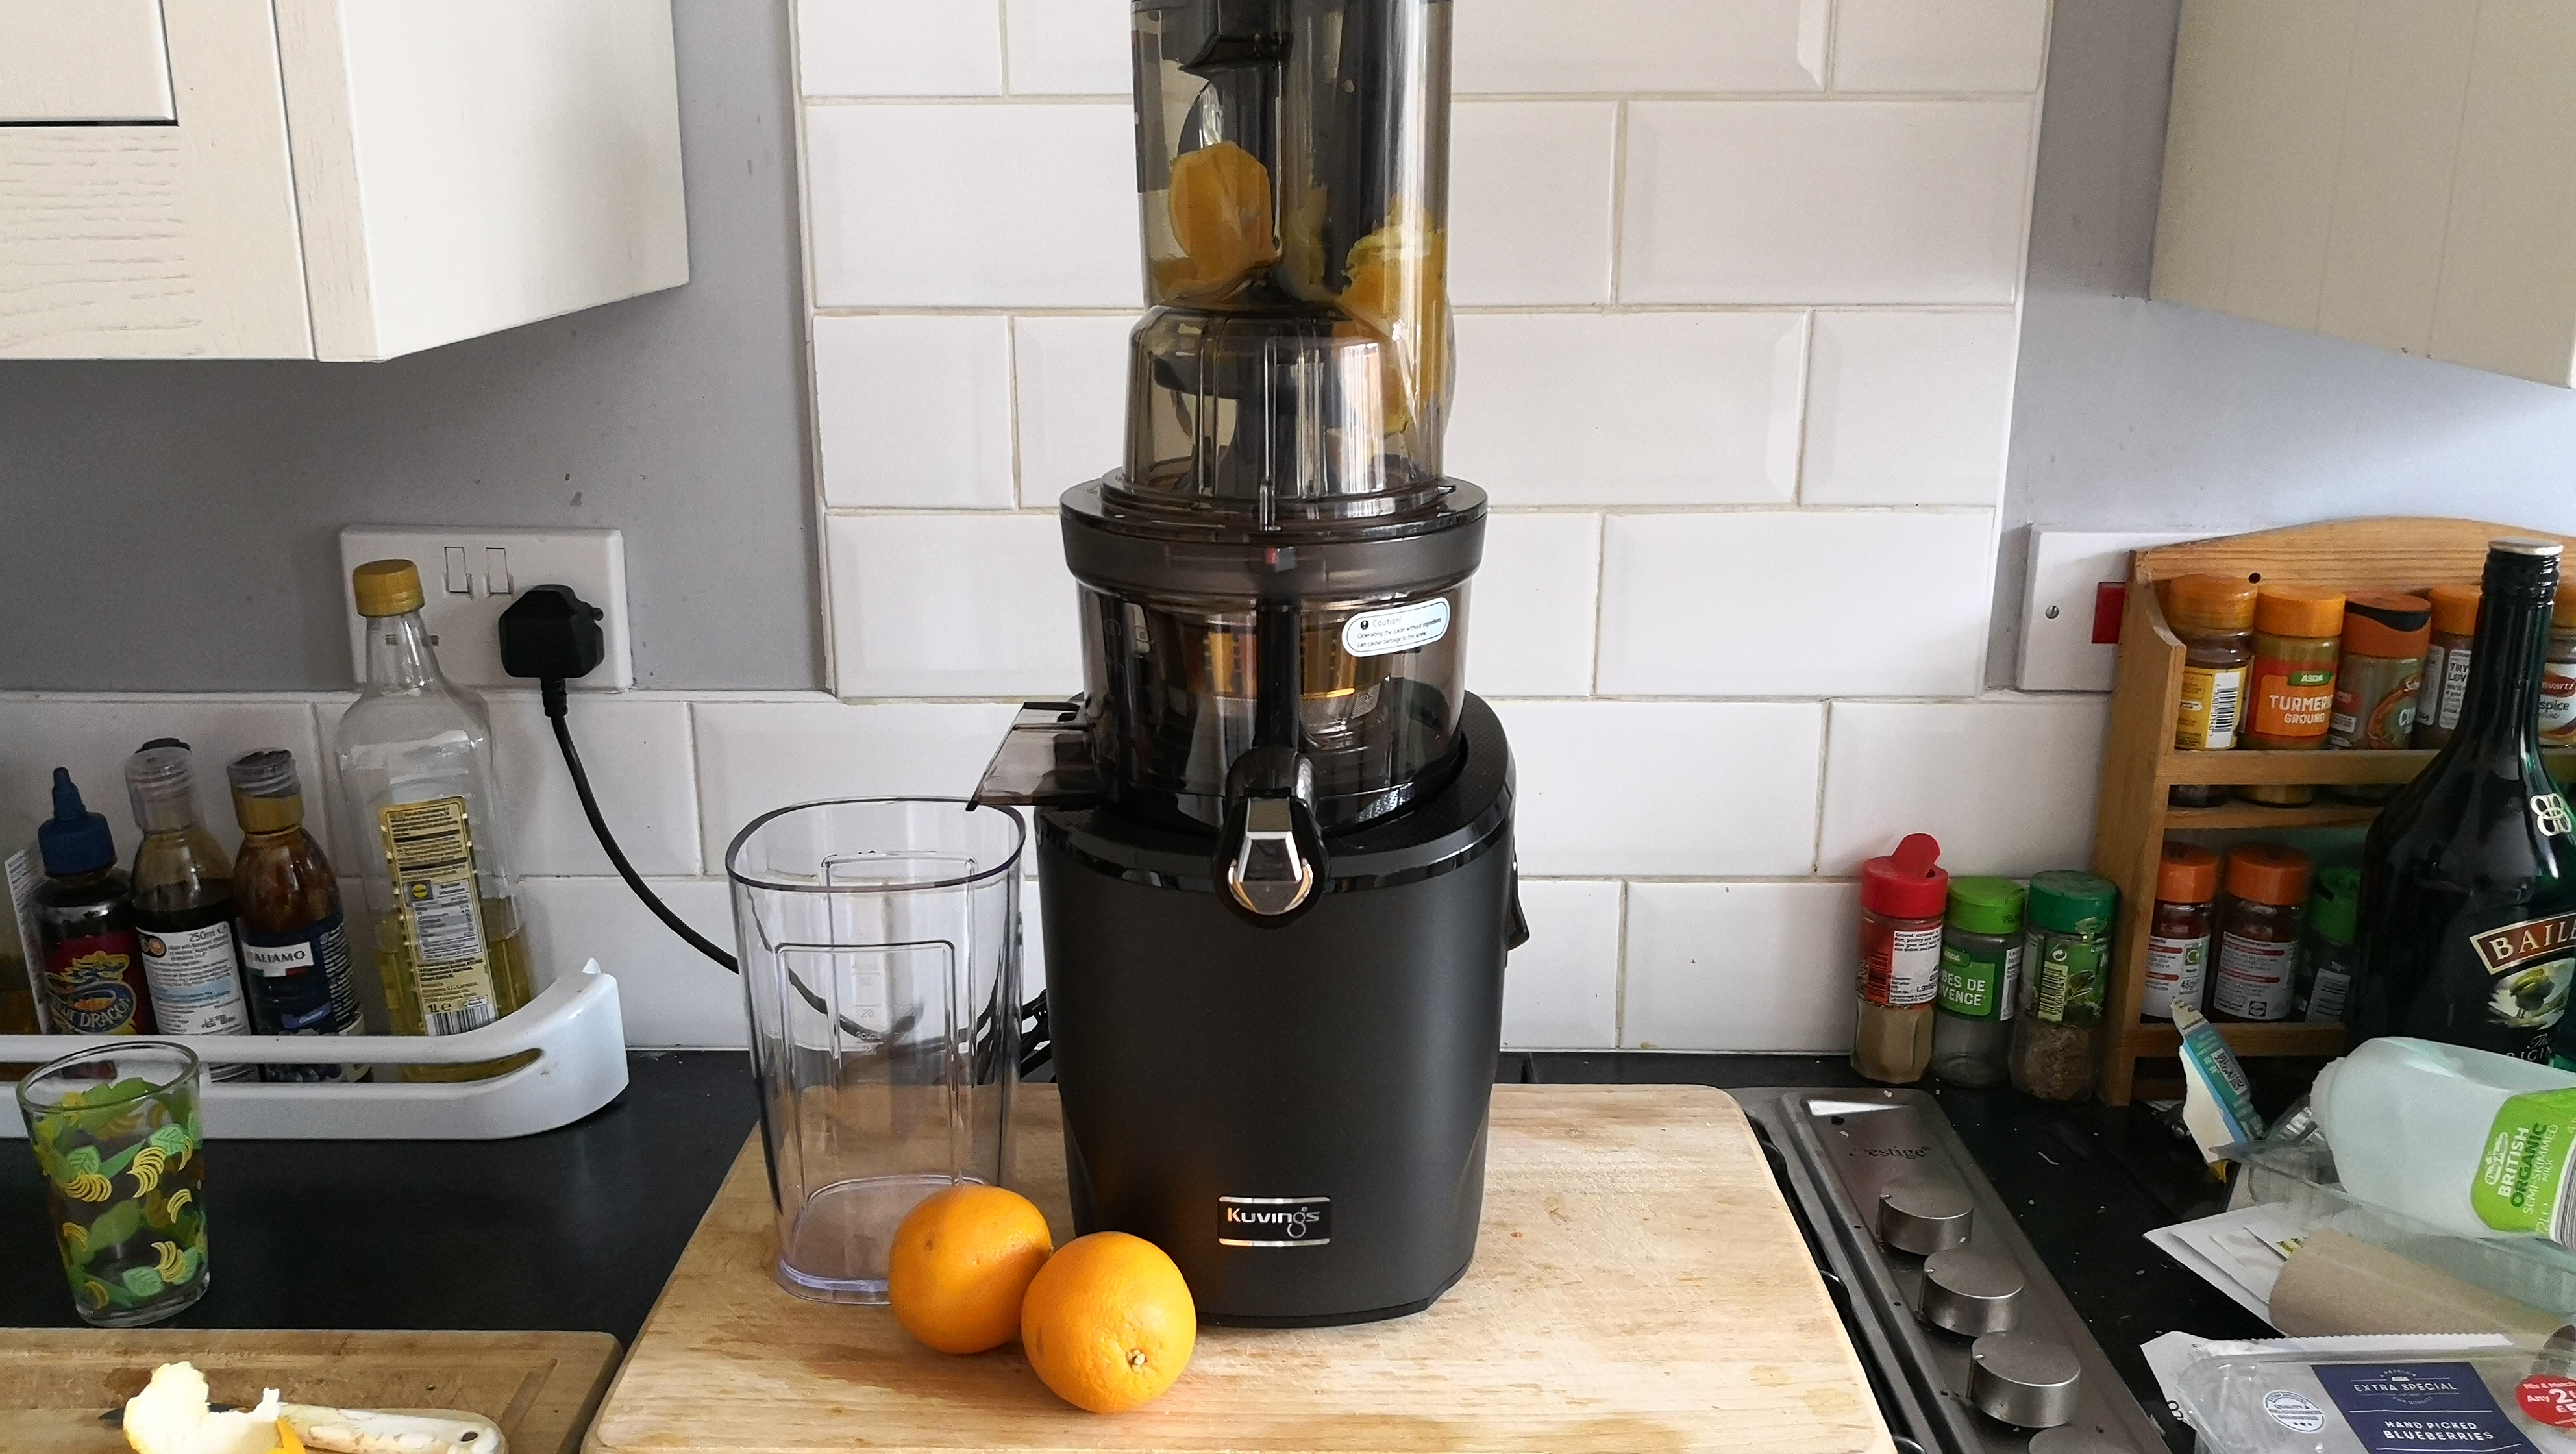 Kuvings Revo830 Review - Best Juicer For Celery Juice & Carrots? 